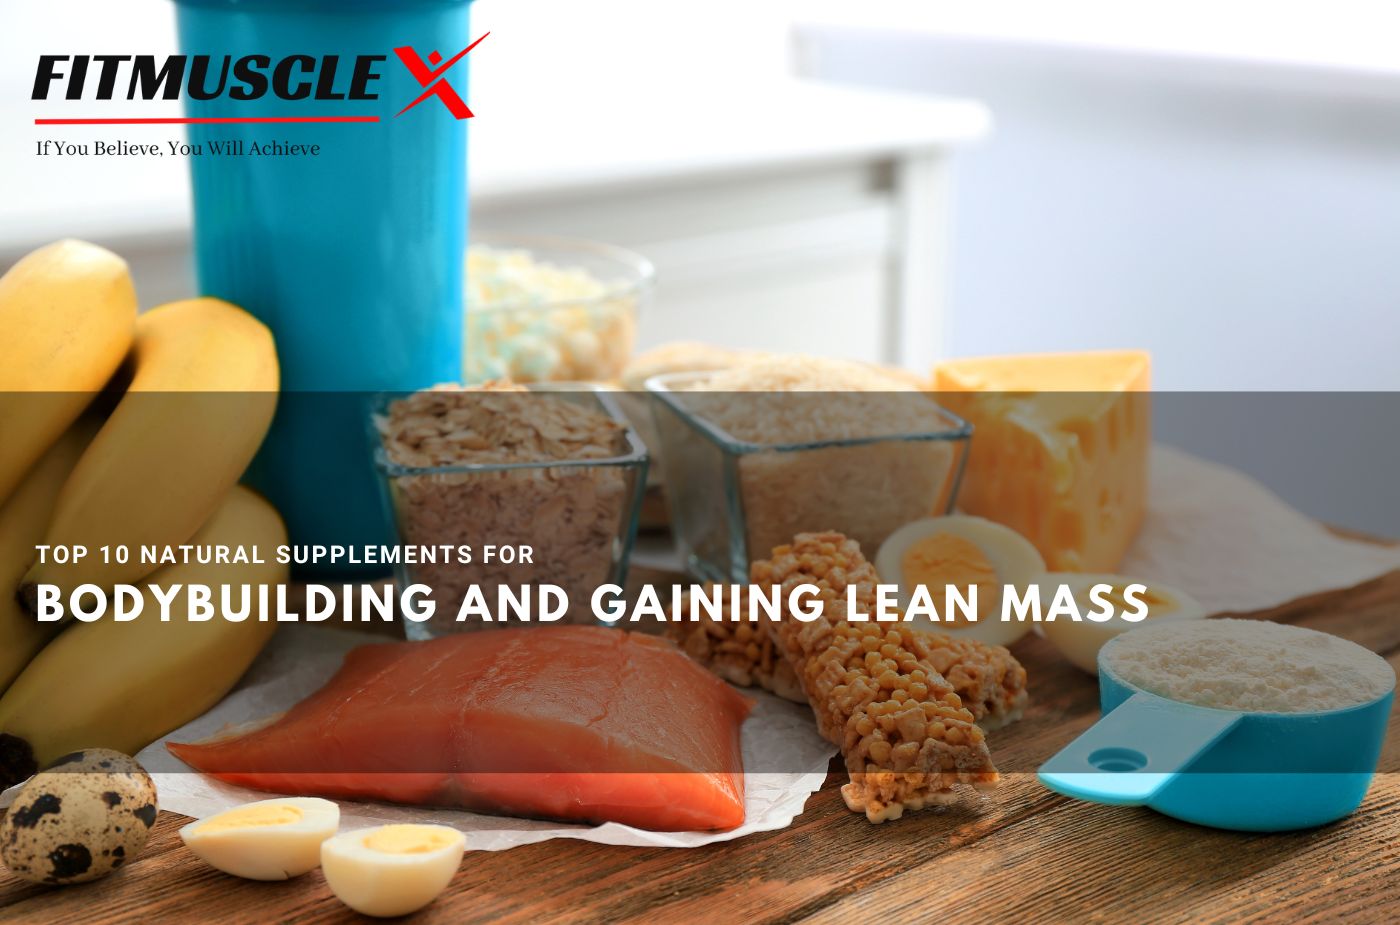 Top 10 Natural Supplements for Bodybuilding and Gaining Lean Mass